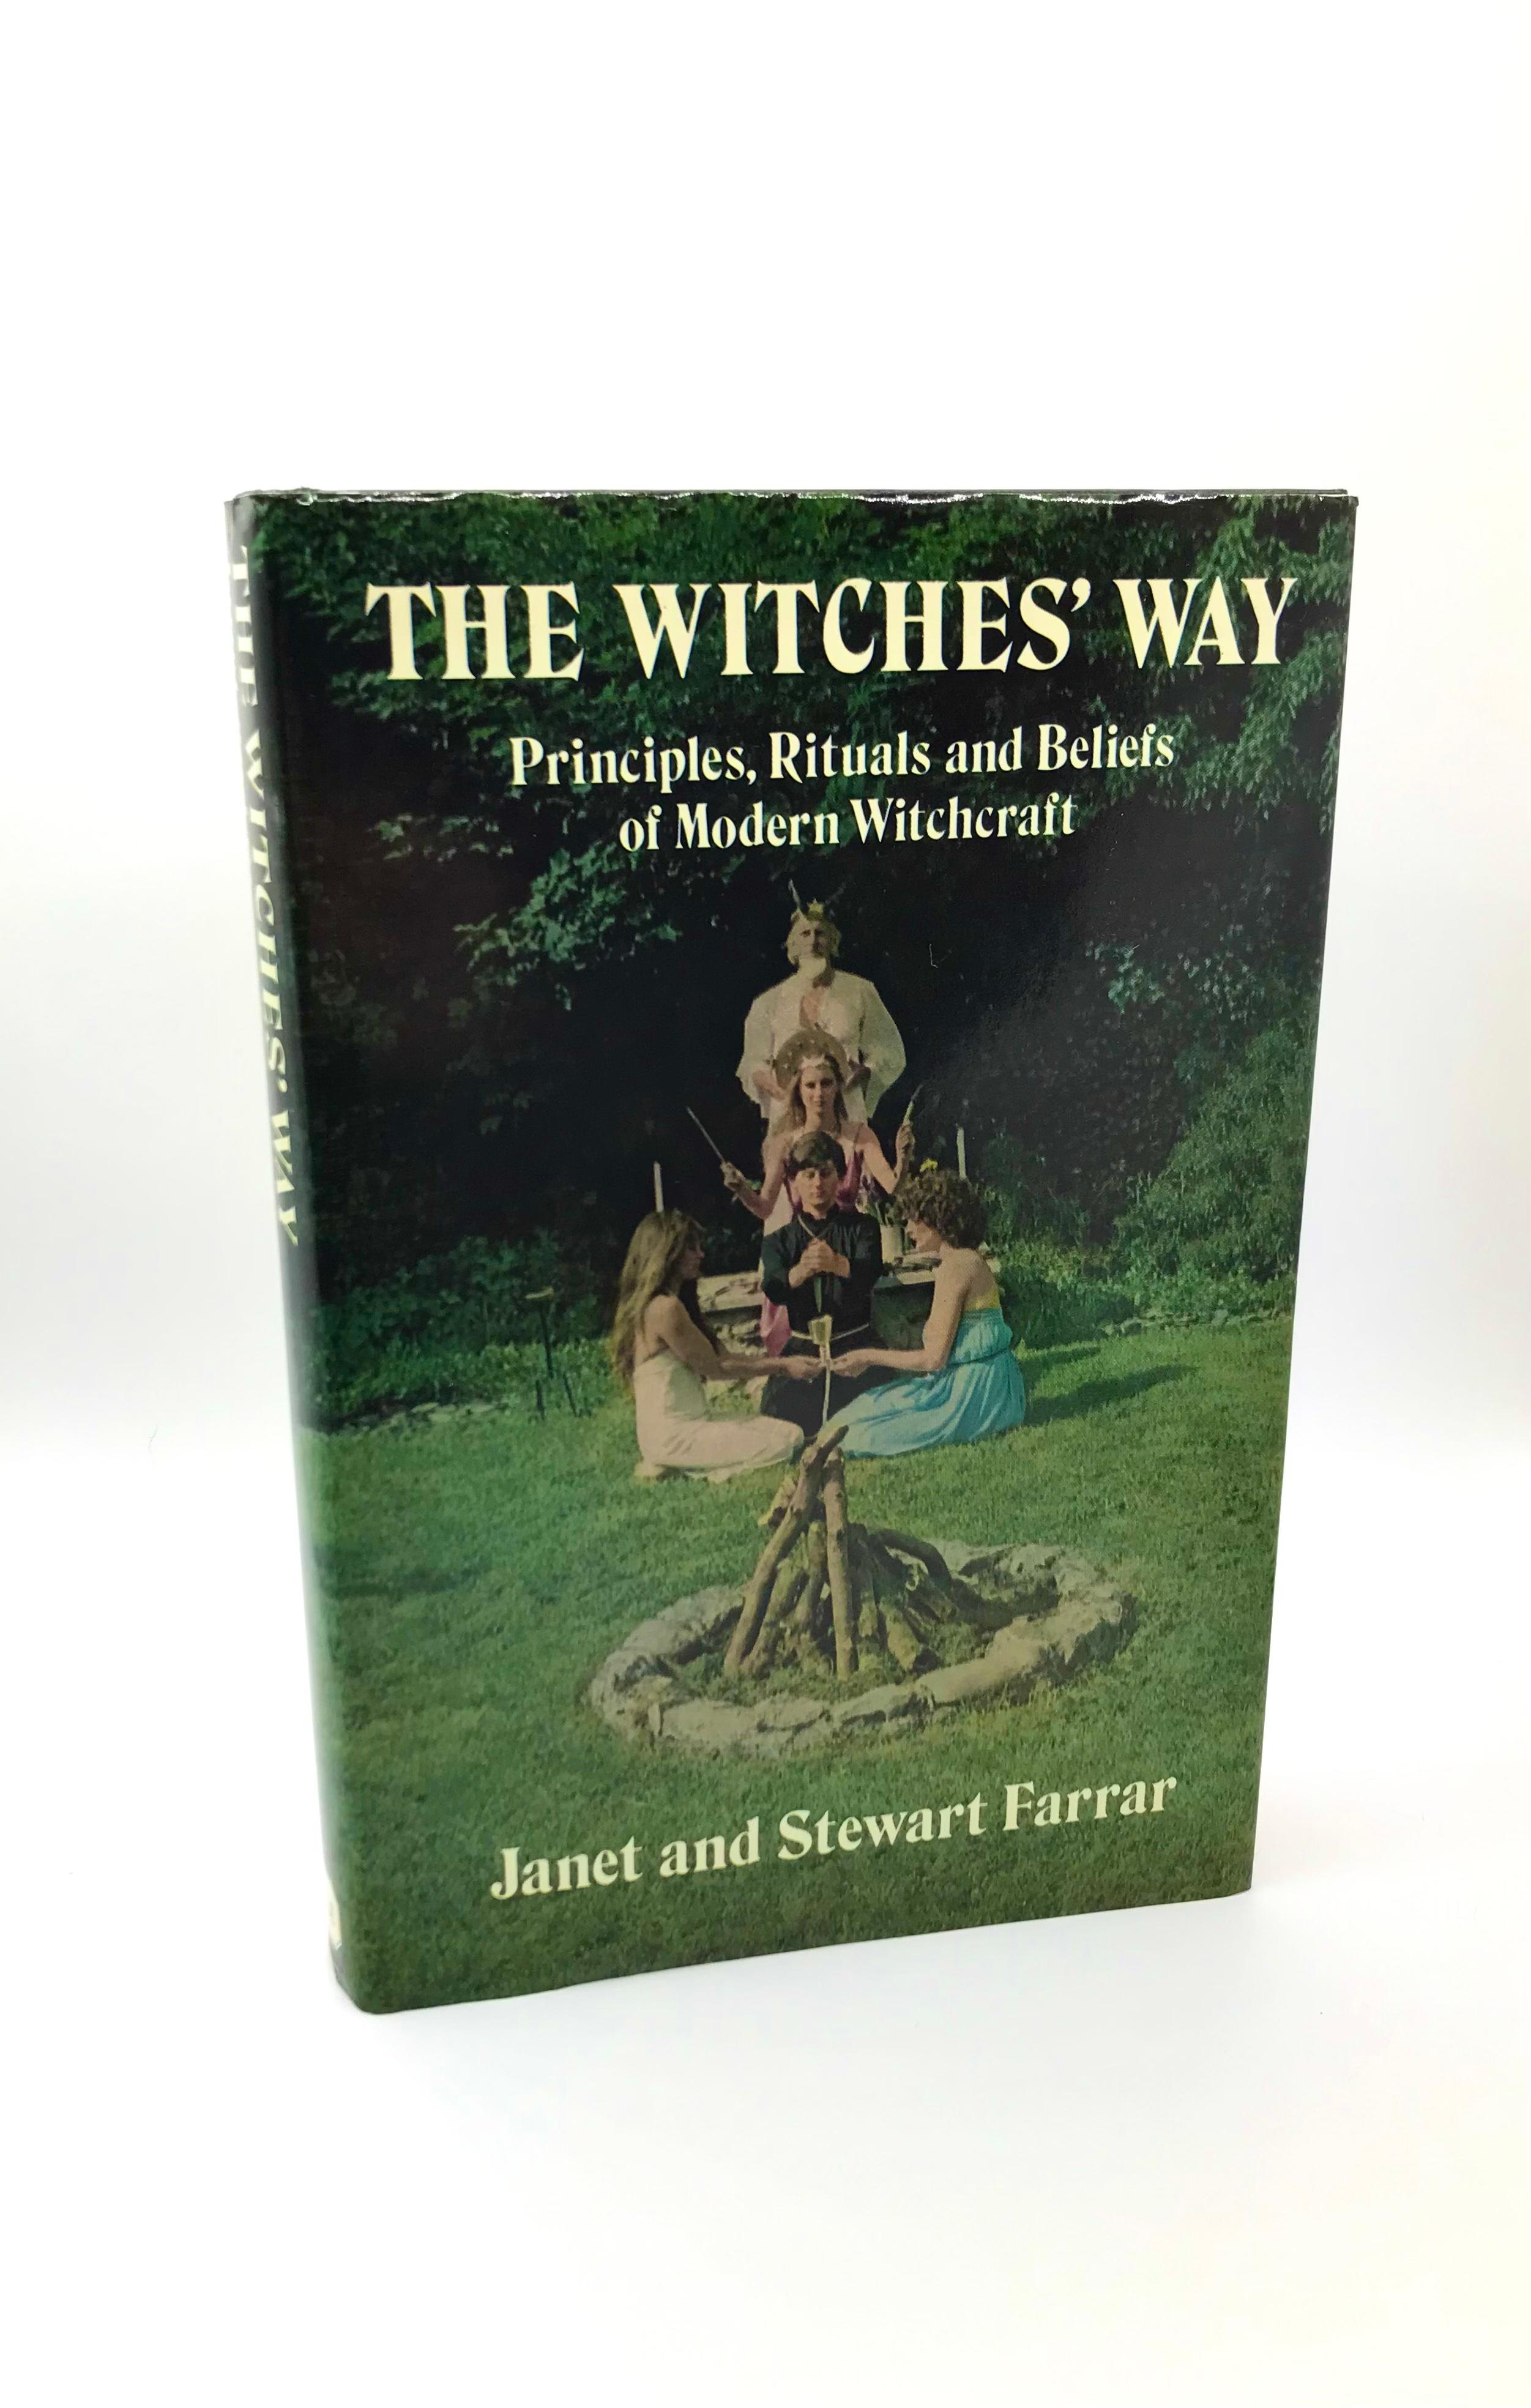 The Witches' Way: Principles, Rituals and Beliefs of Modern Witchcraft by Janet and Stuart Farrar